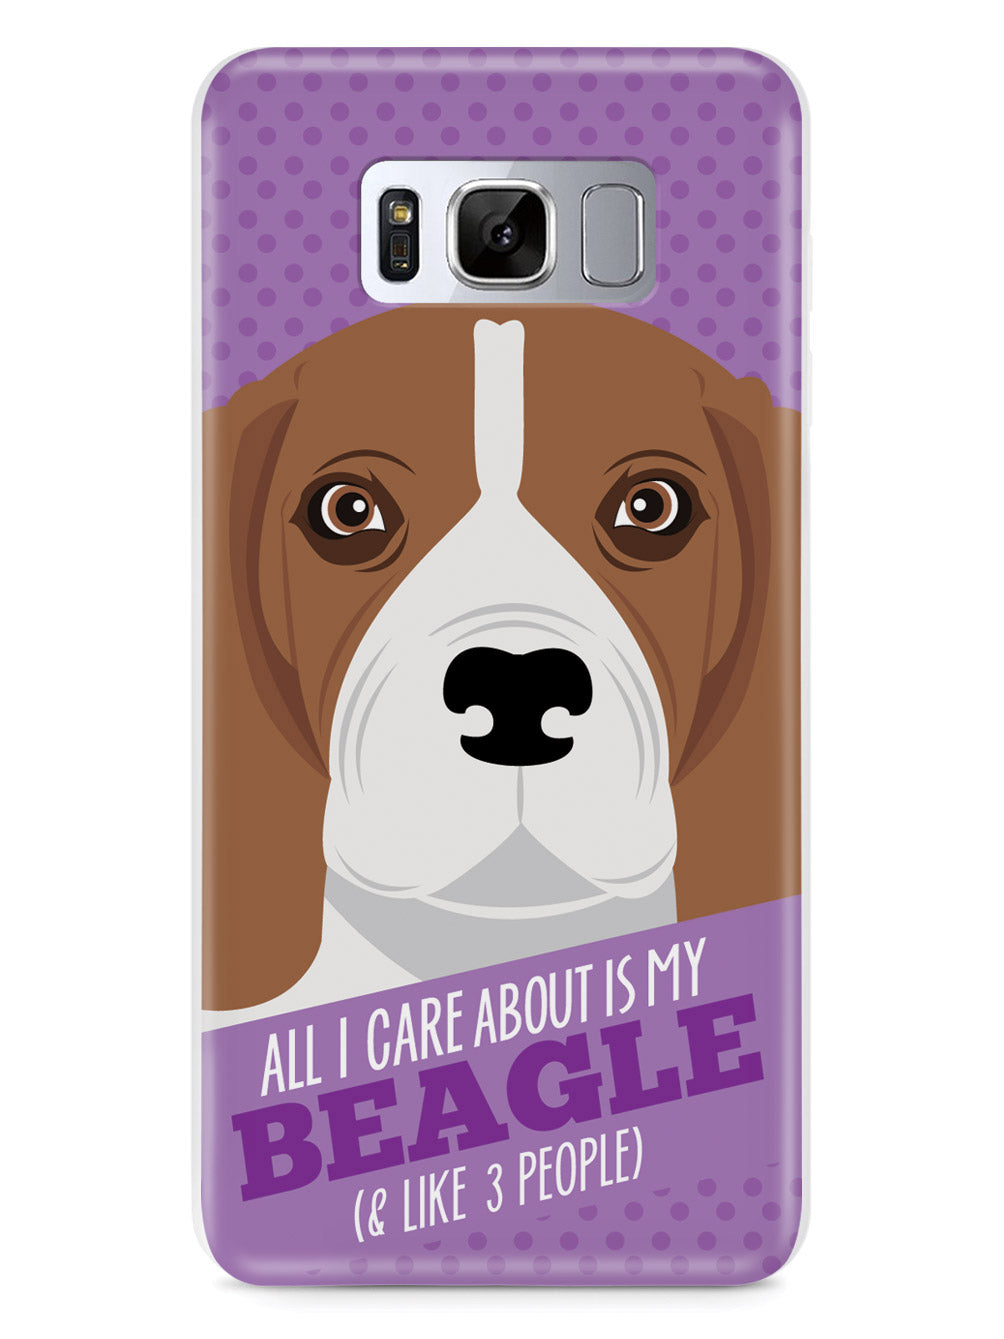 All I Care About Is My Beagle Case